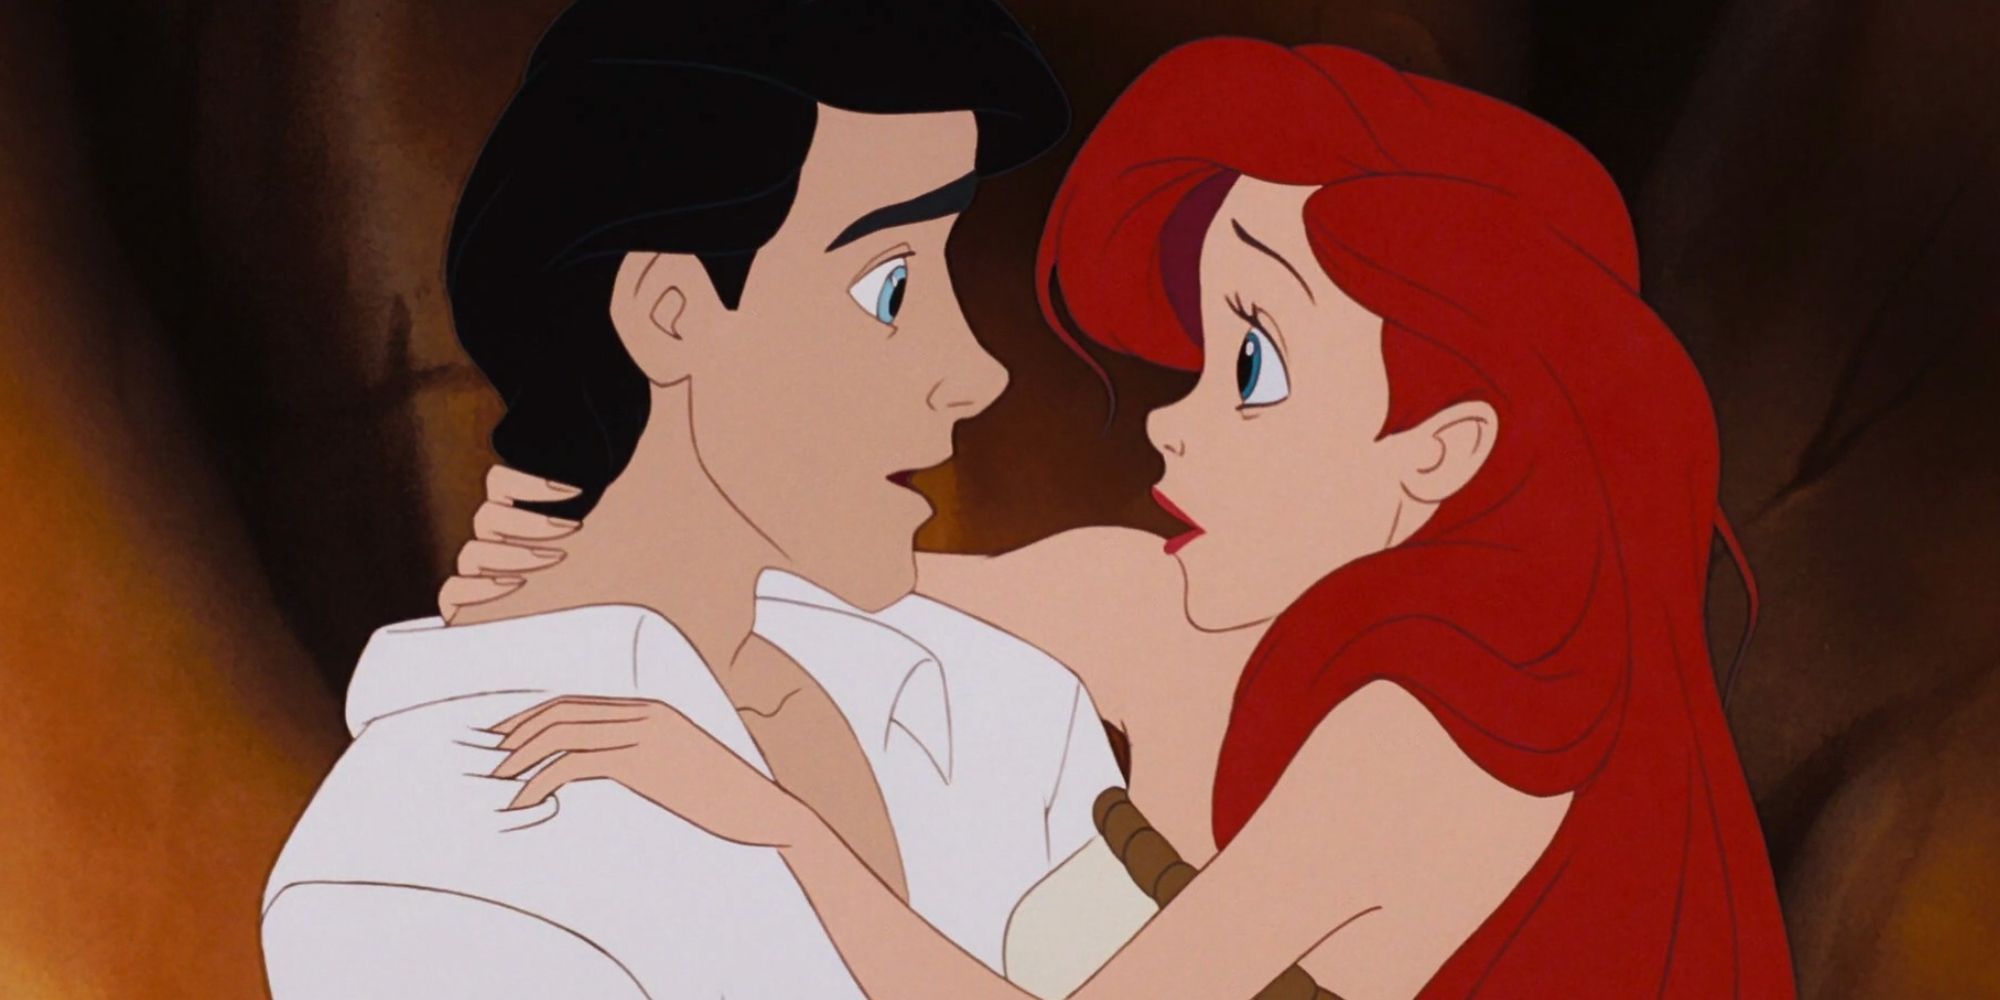 Prince Eric and Ariel holding each other